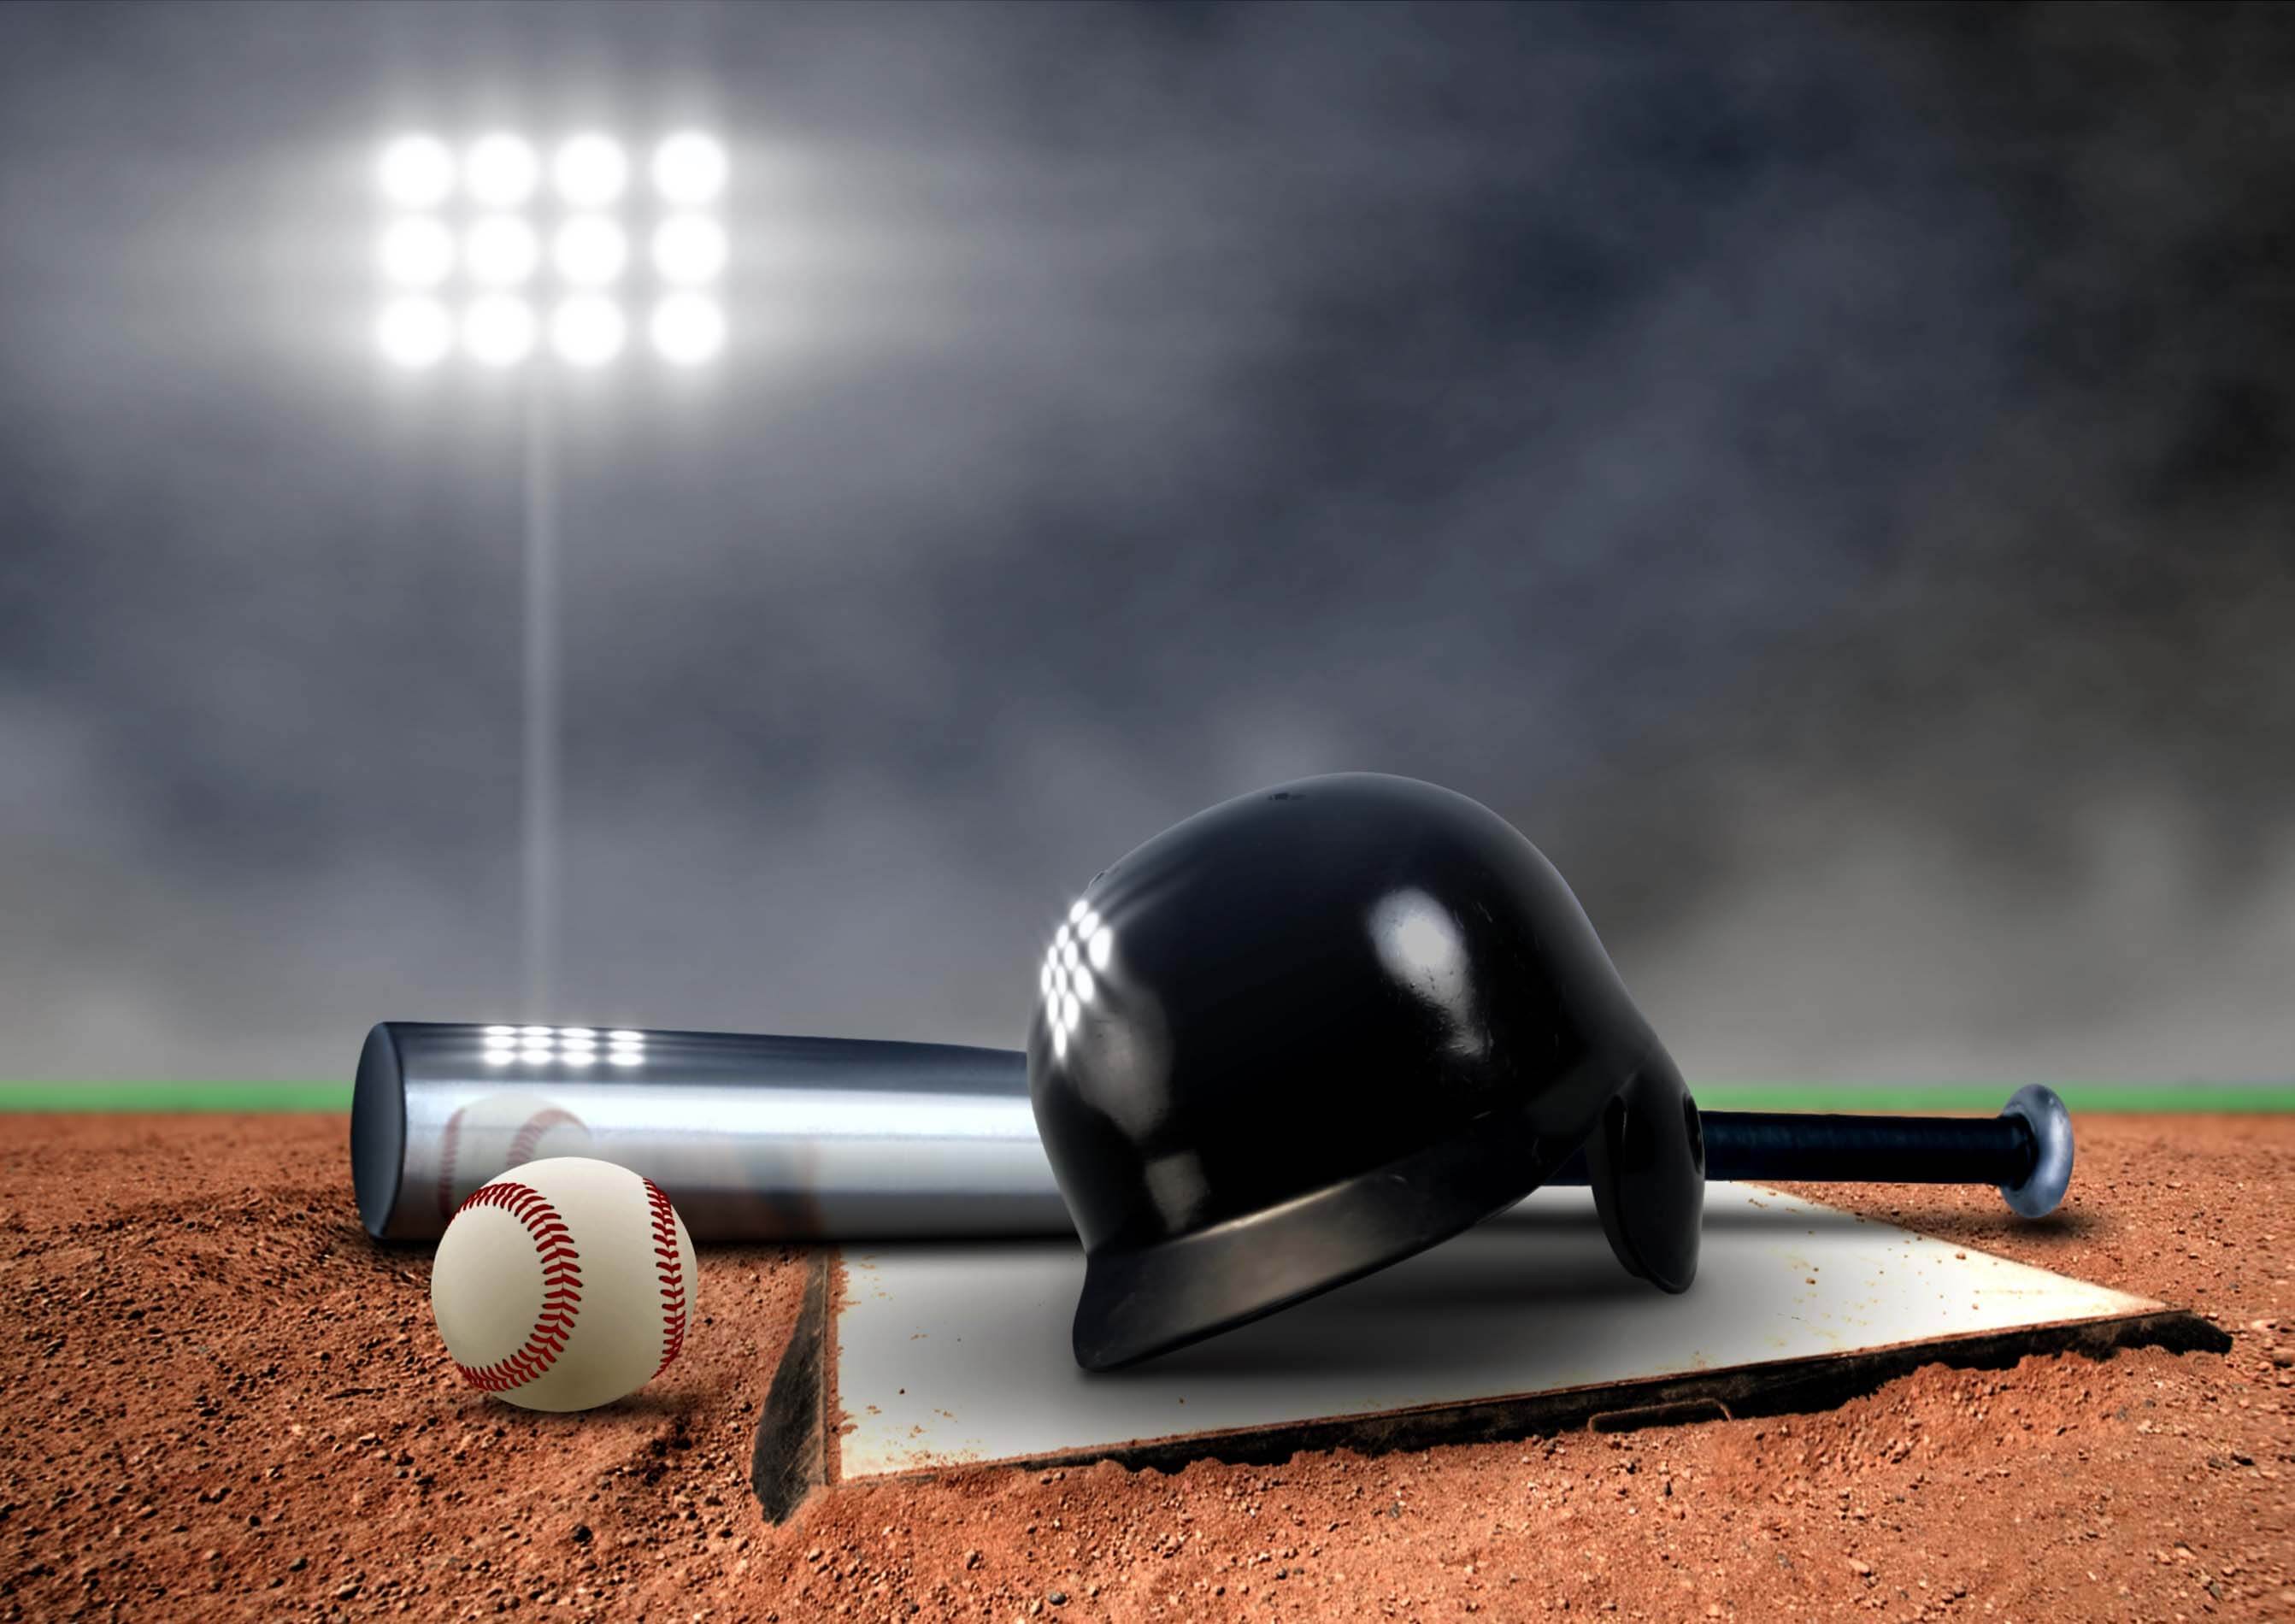 Baseball Equipment and Accessories